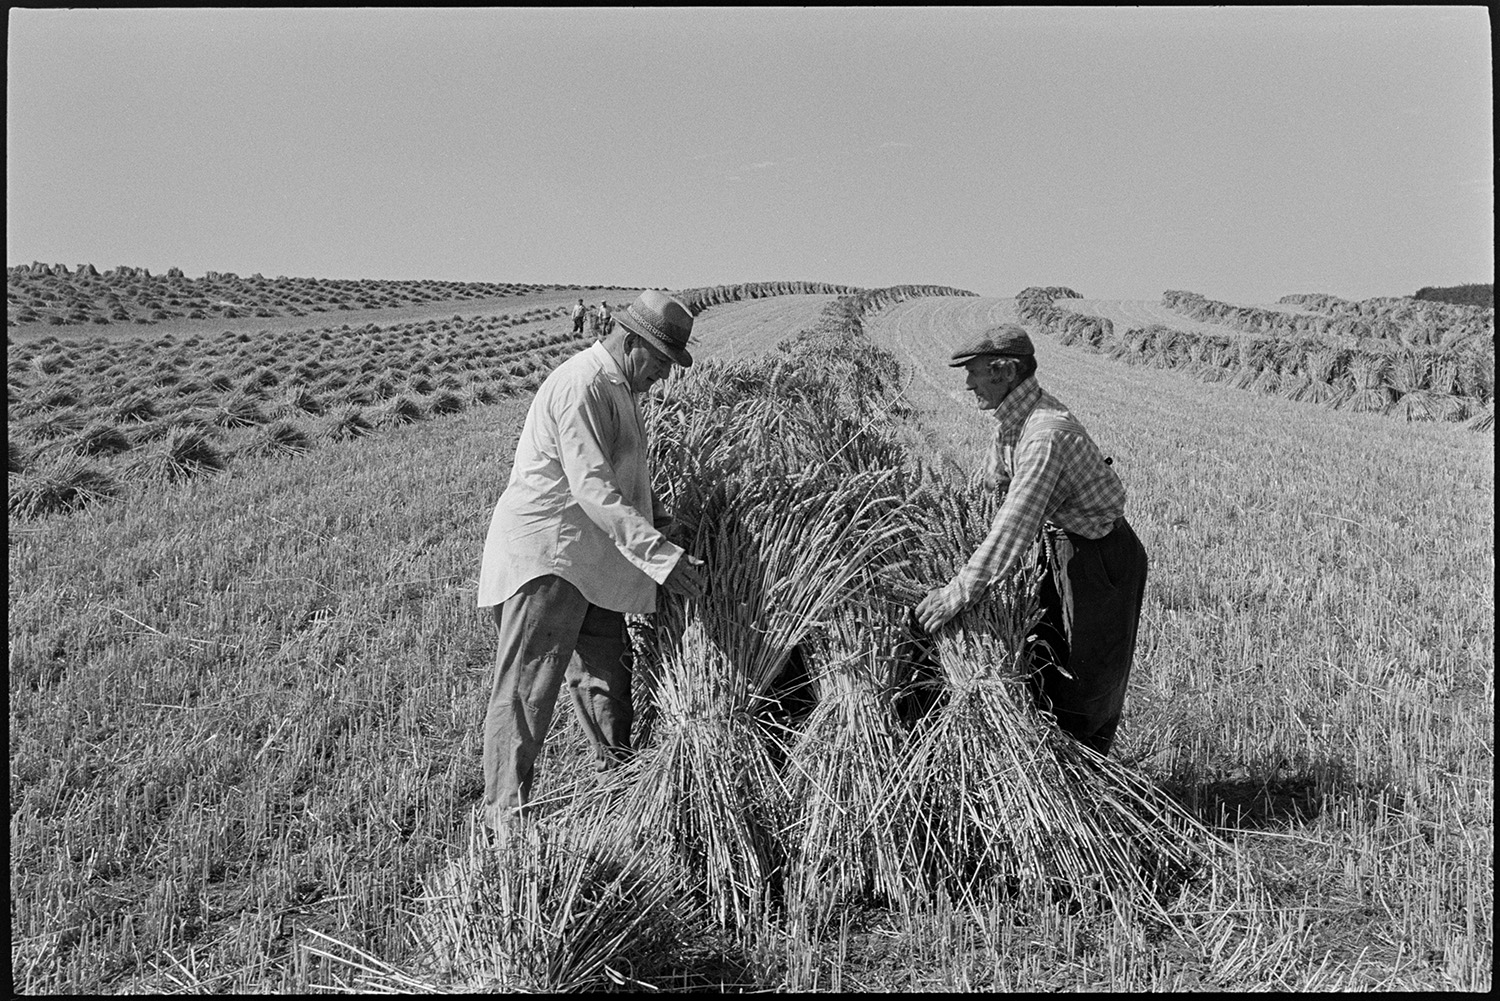 Men setting up stooks.
[Four men, including Mr Down, setting up stooks of corn in a field at Spittle, Chulmleigh.]